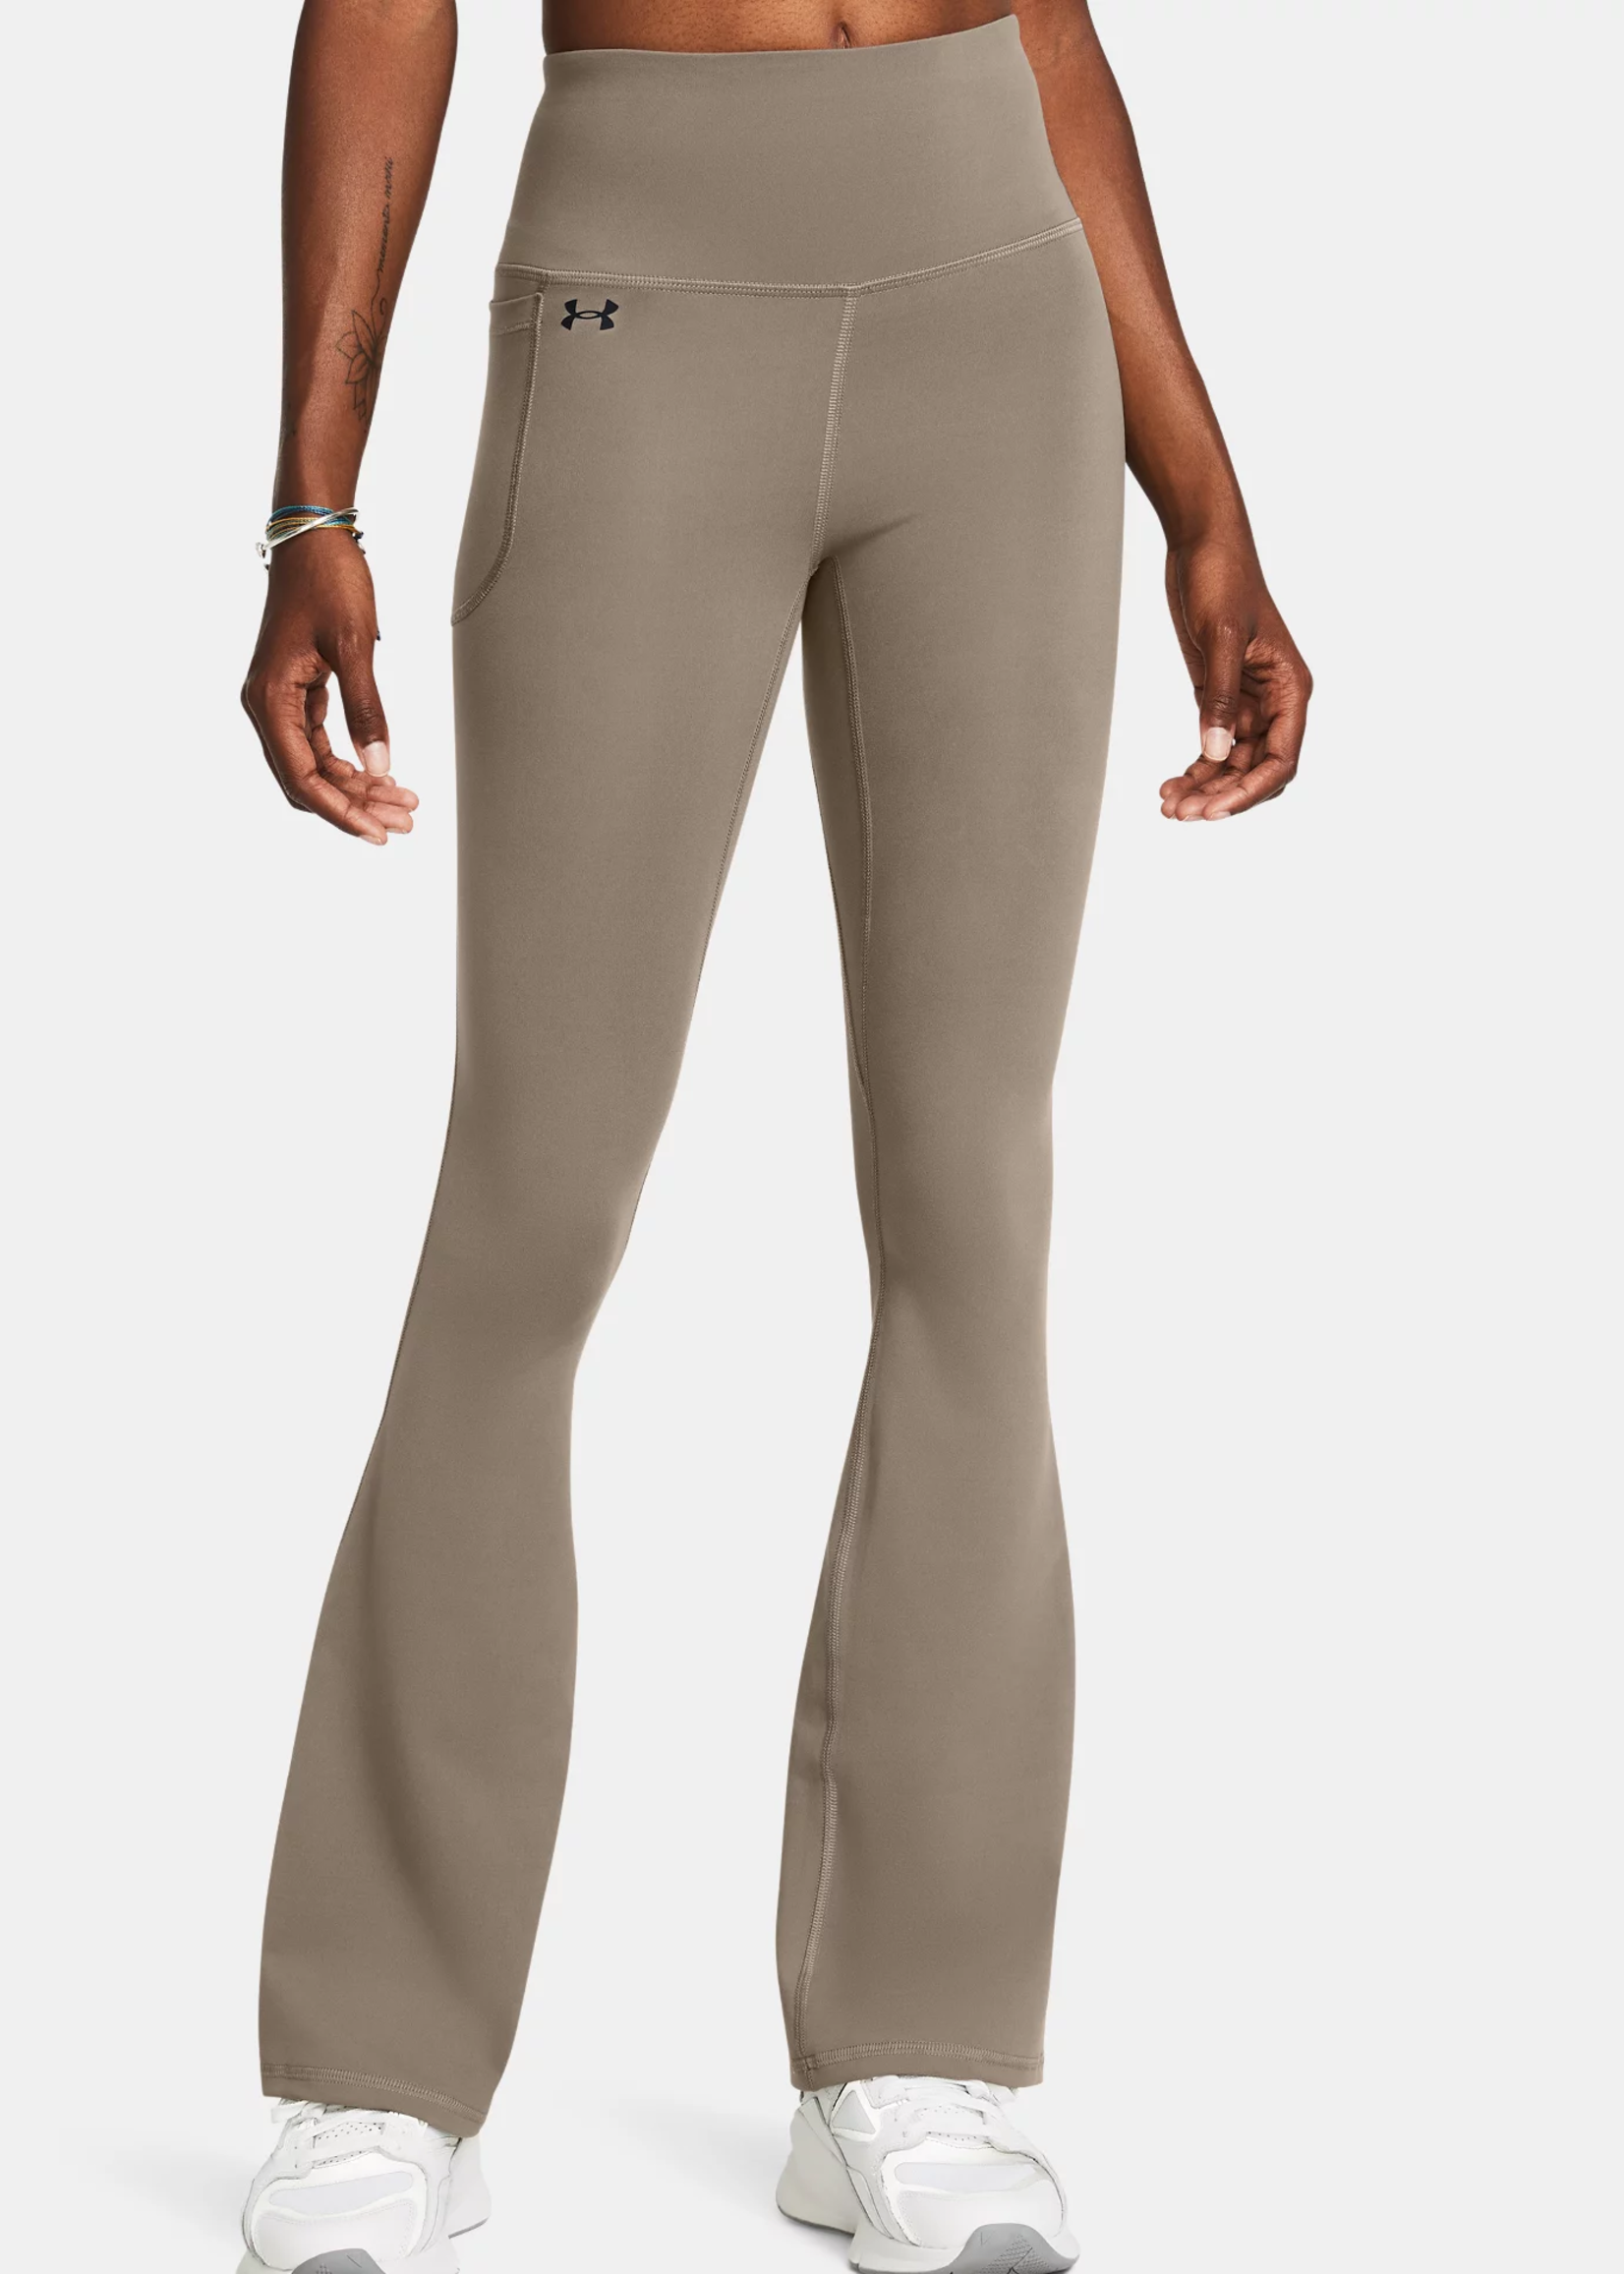 Under Armour Motion Flare Pant-BRN